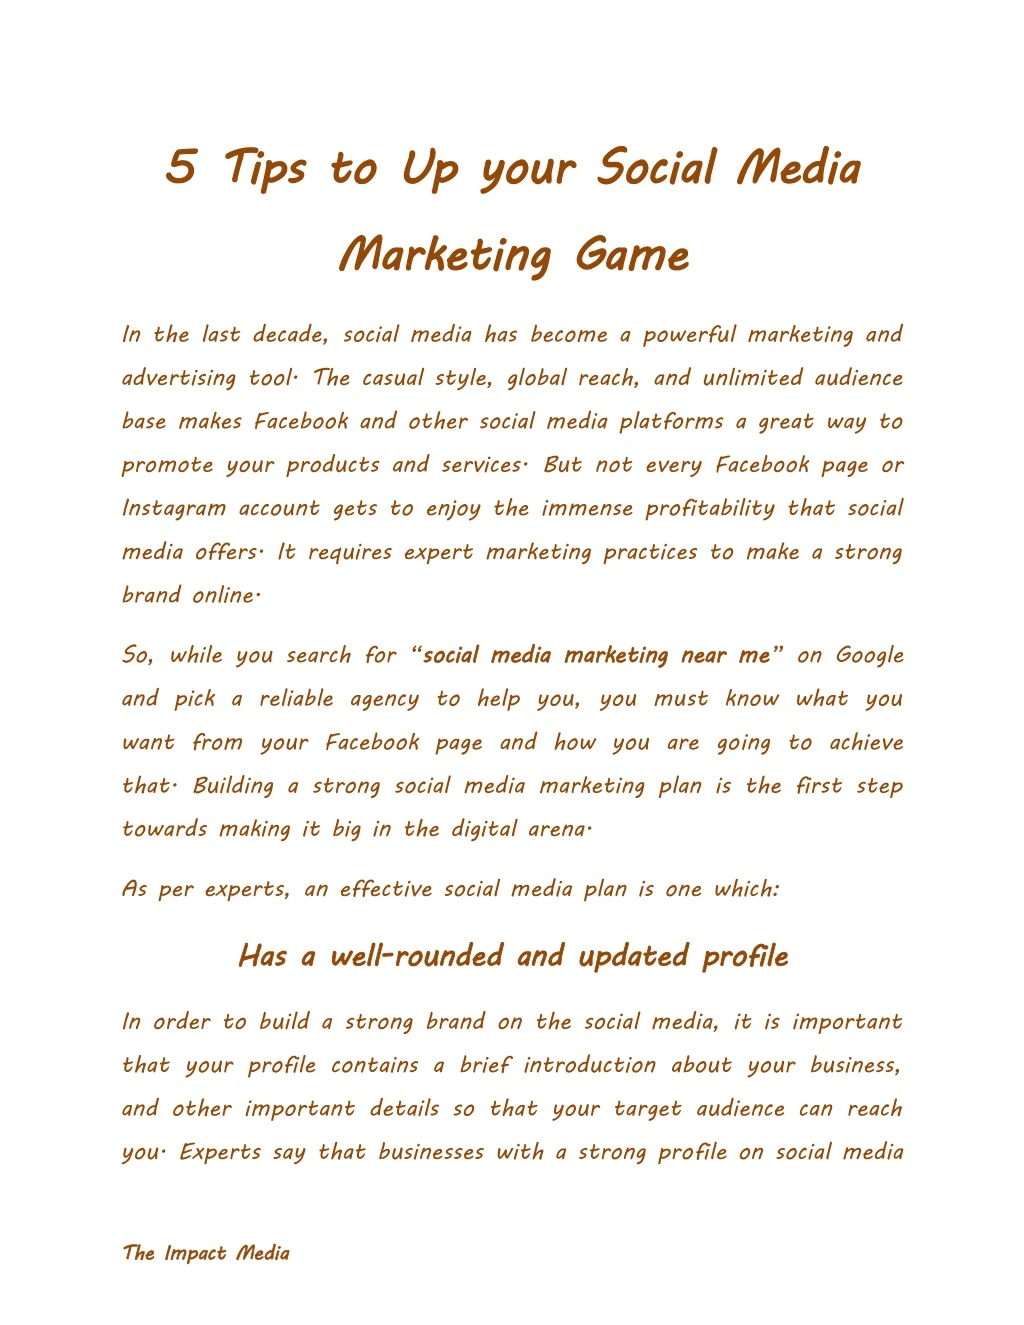 5 tips to up your social media marketing game